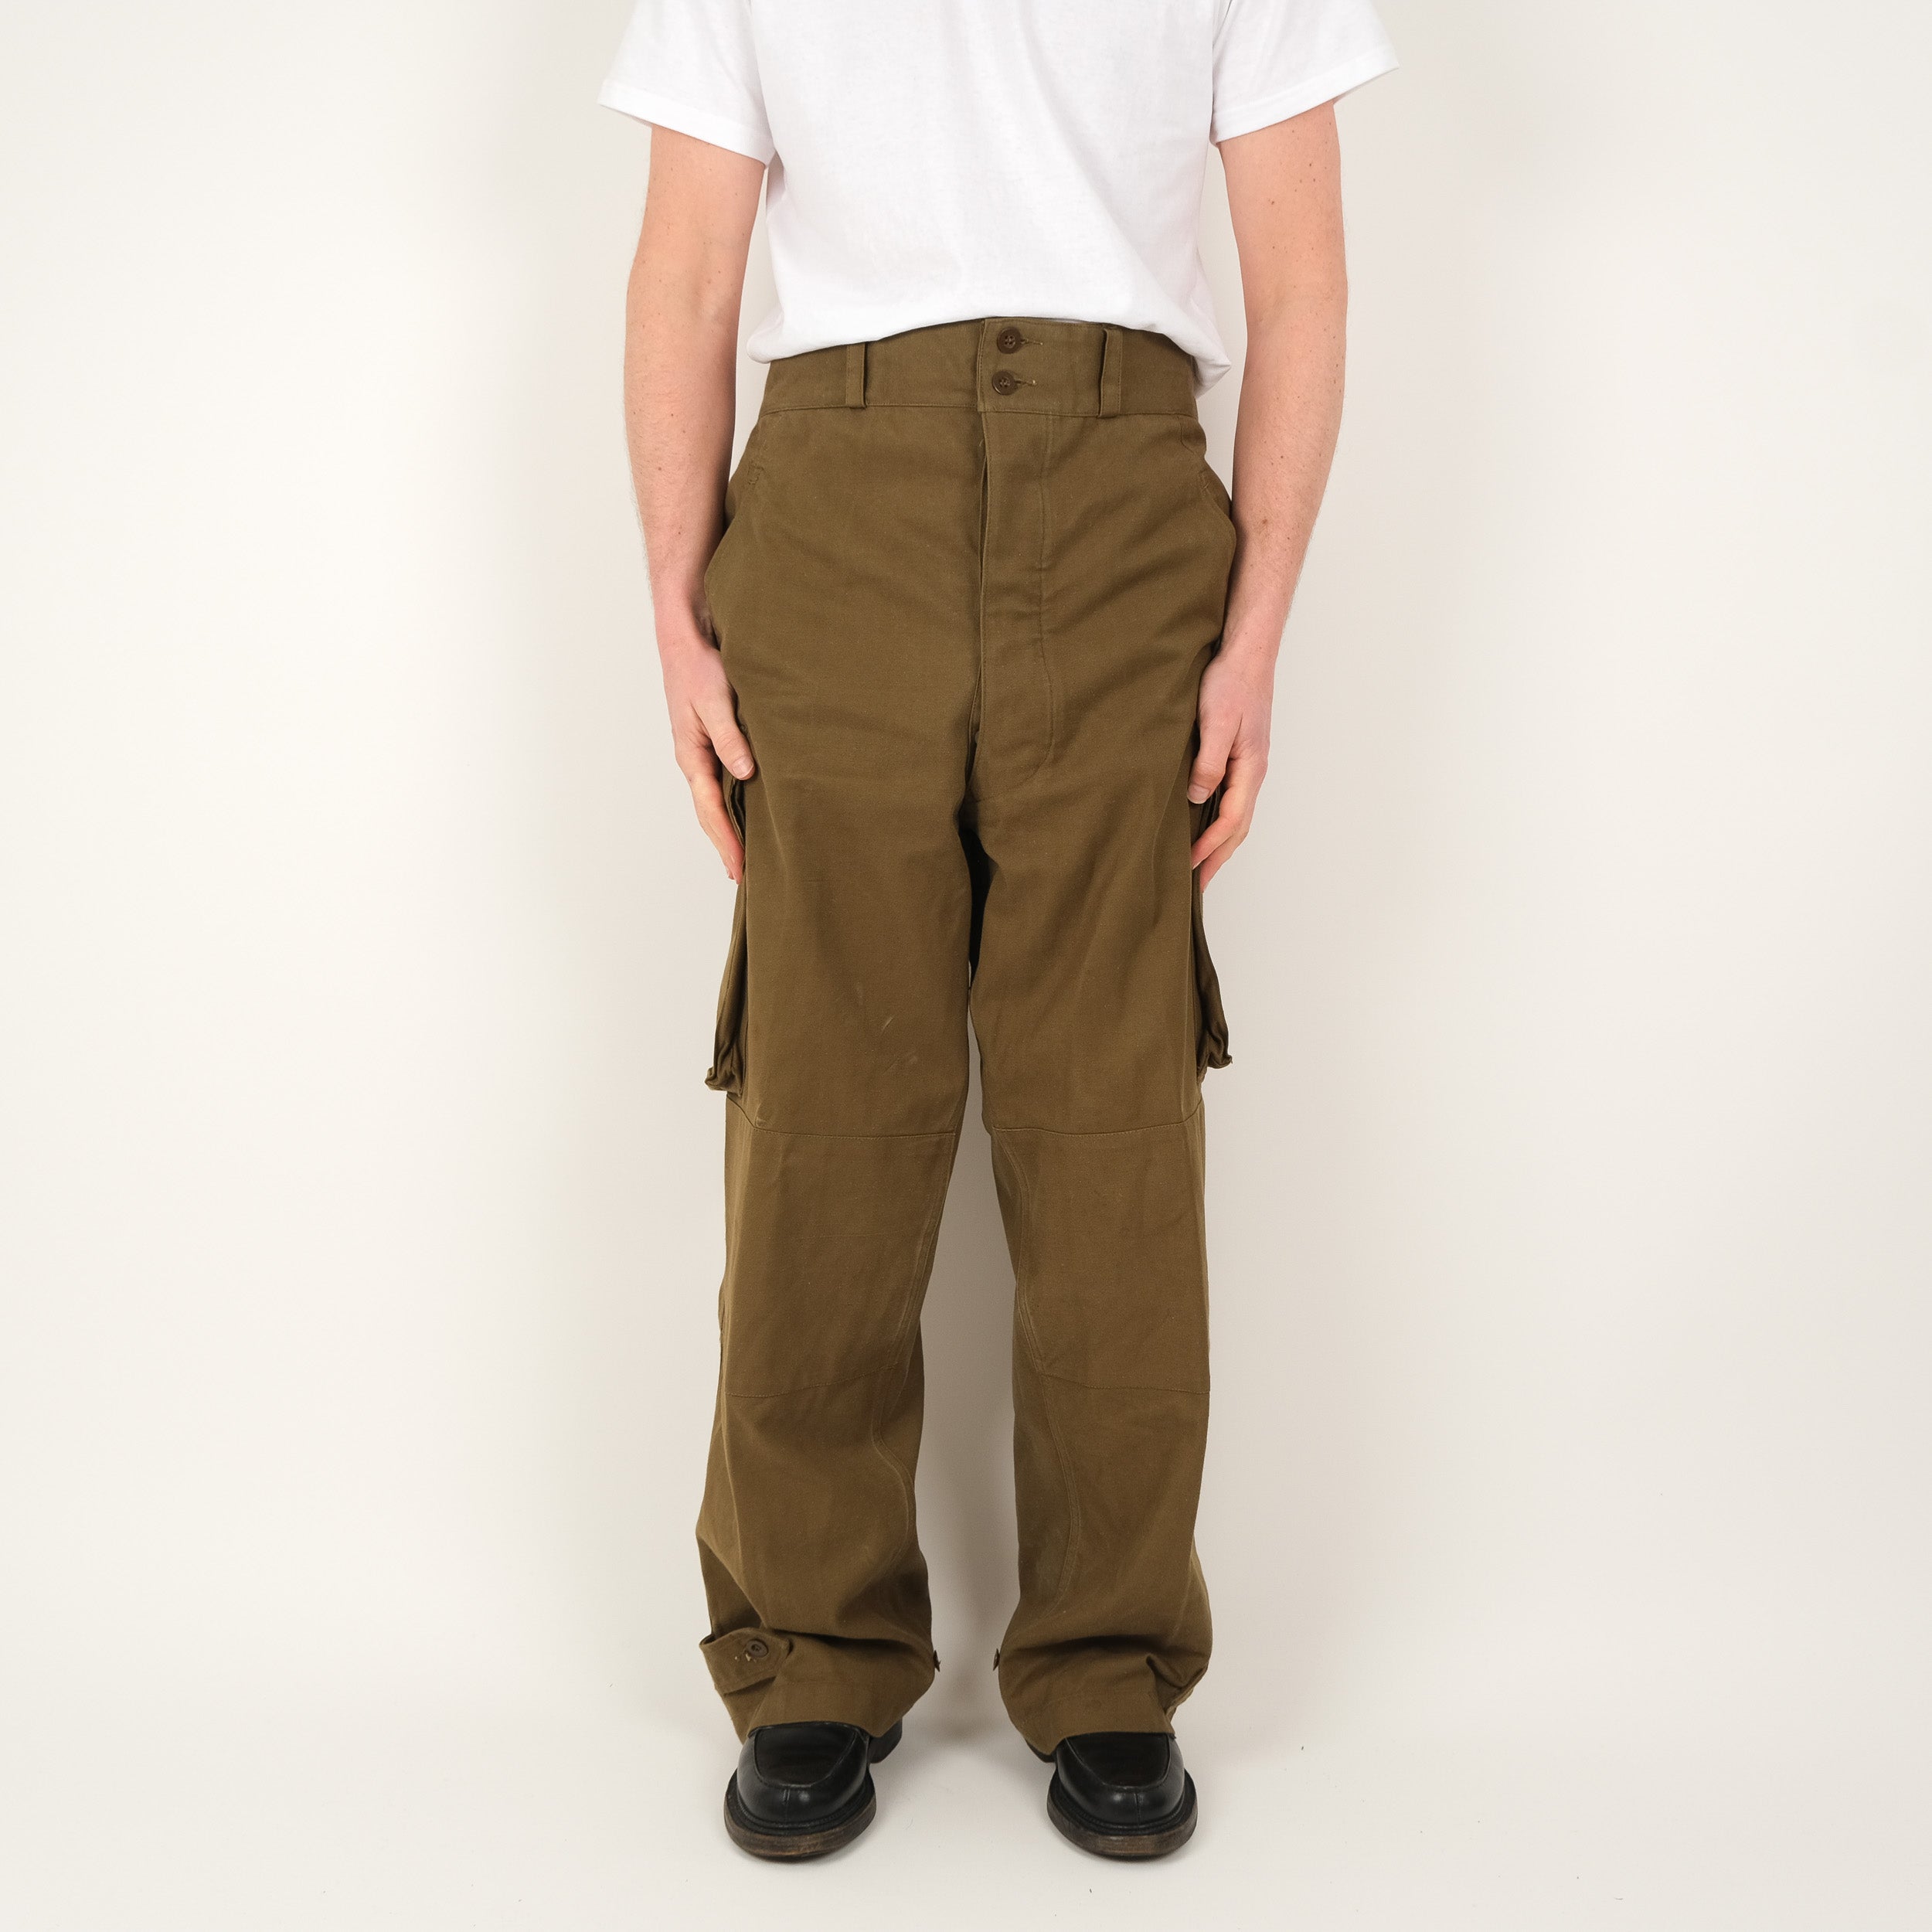 DEADSTOCK M47 FRENCH PANTS - TAG 35 | Universal Surplus best